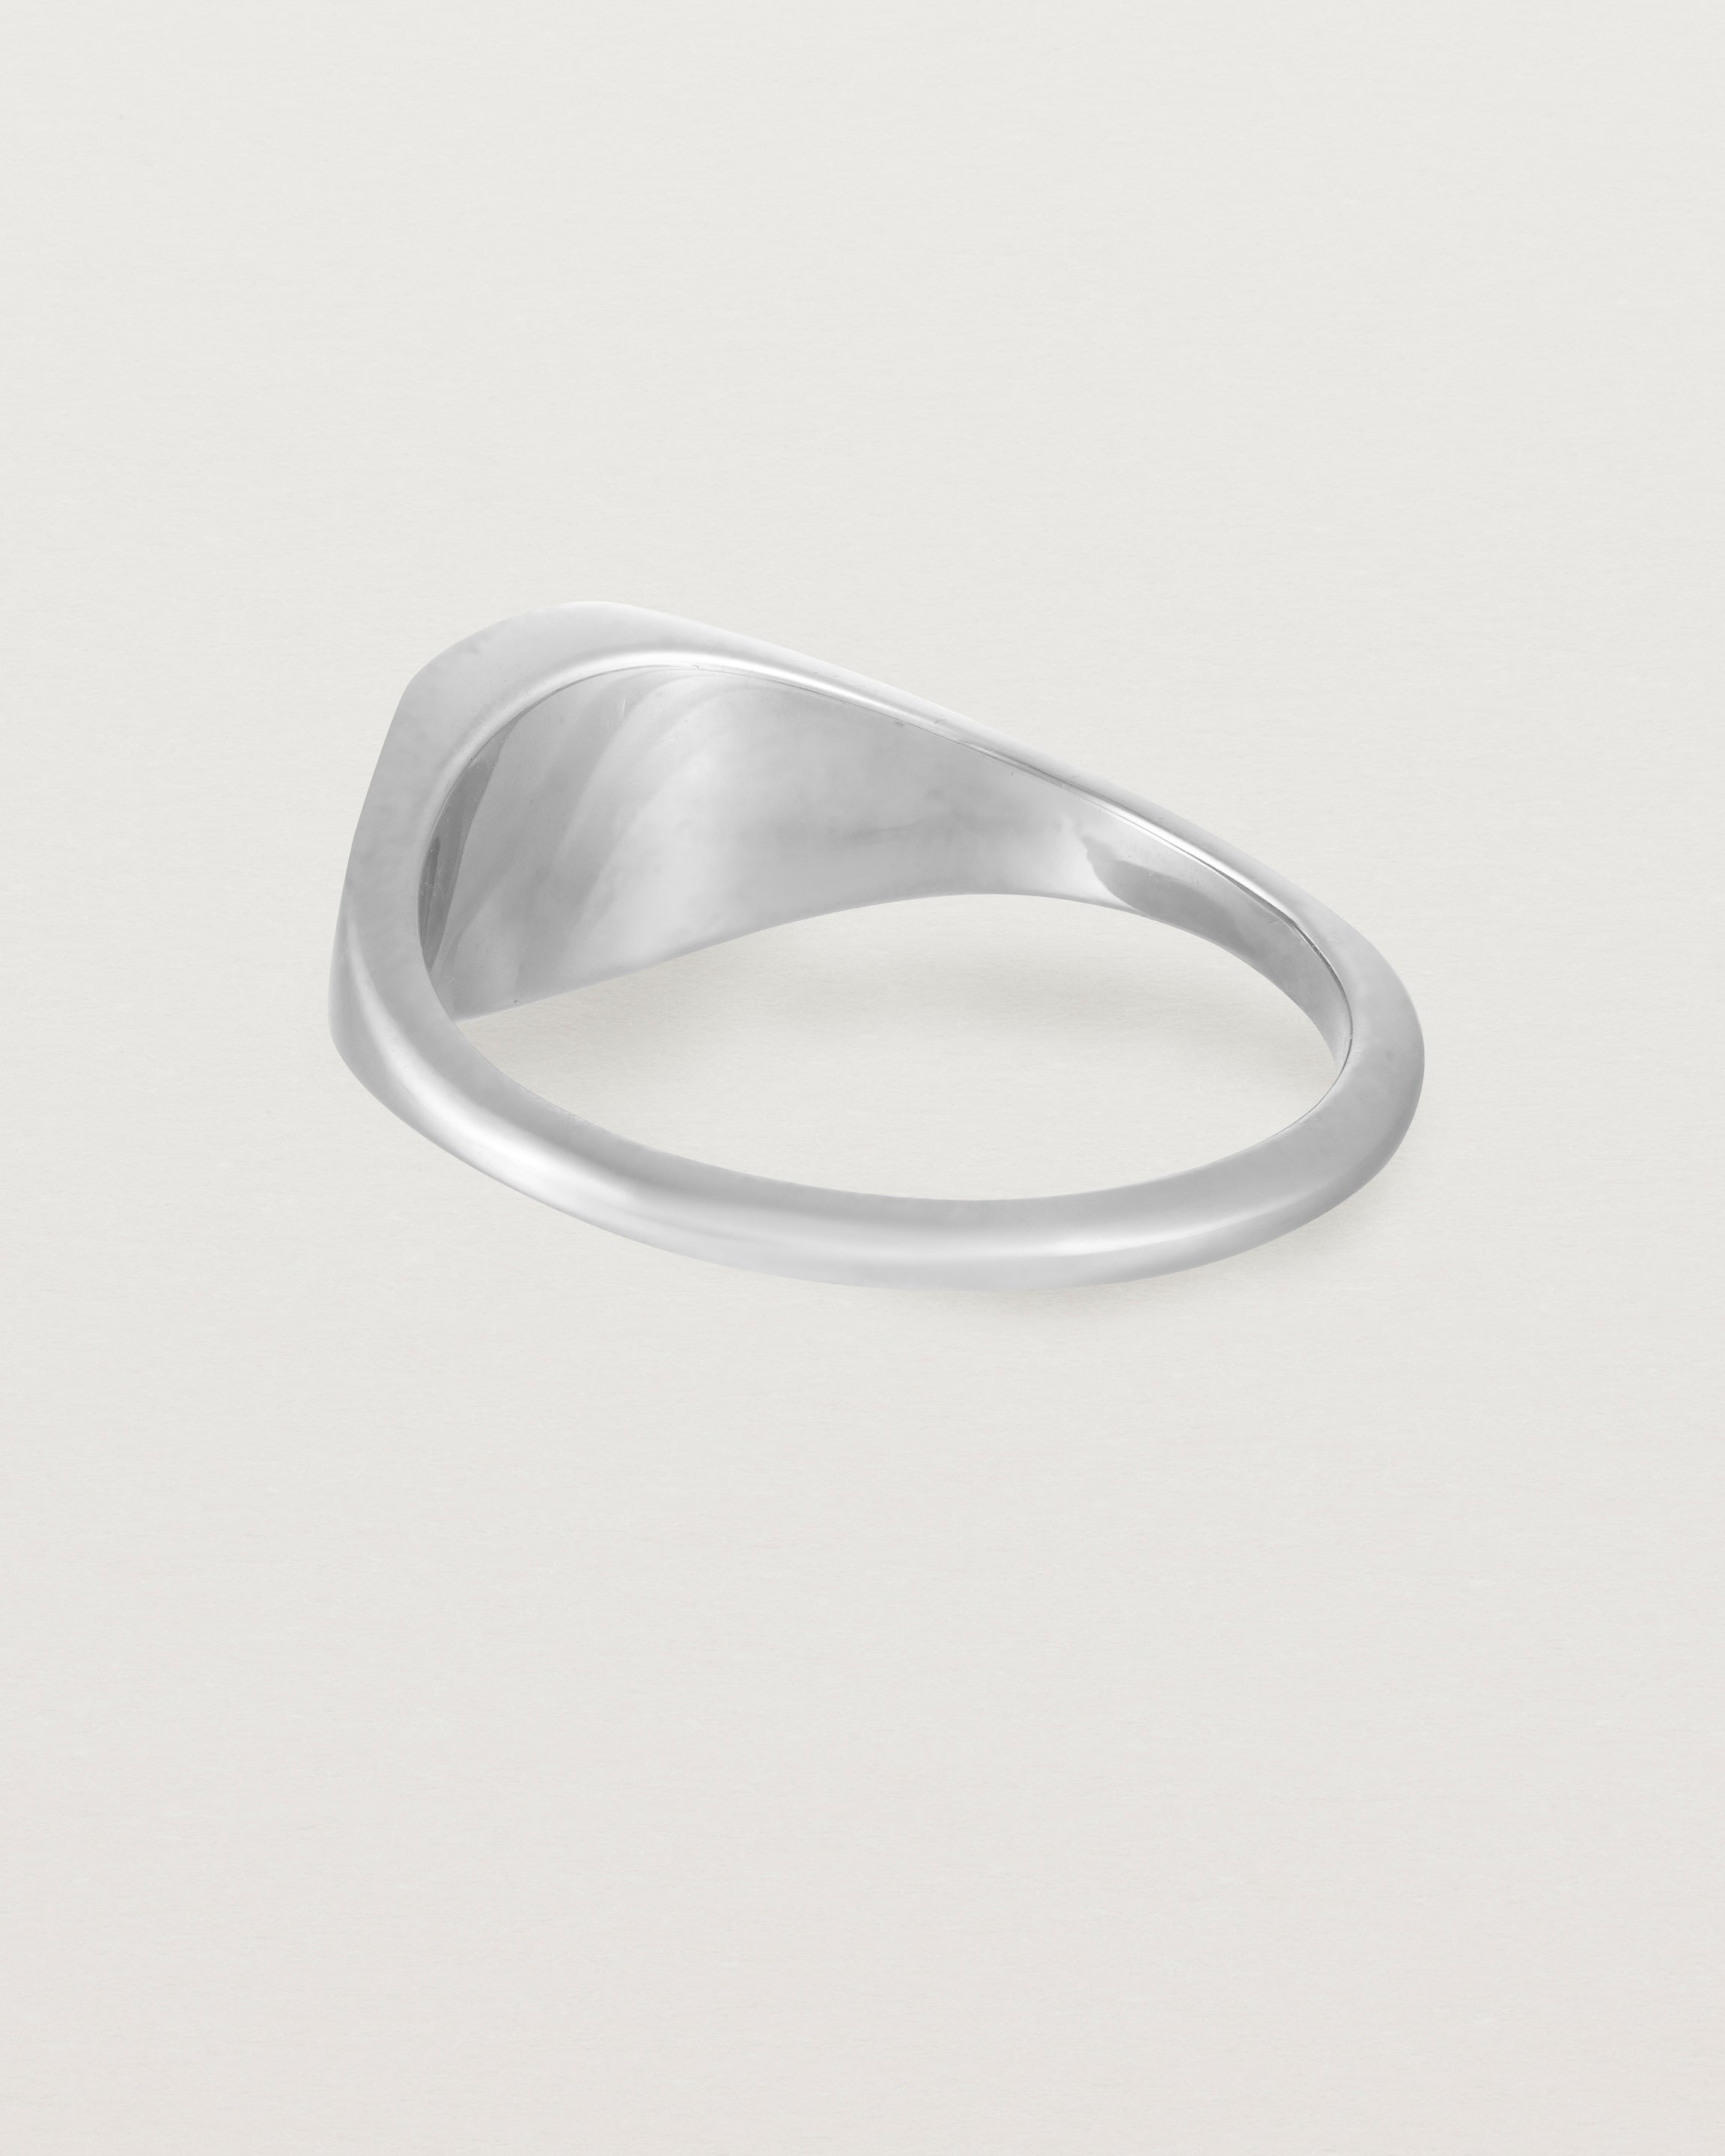 Back view of a simple signet with an elongated rectangular face in white gold